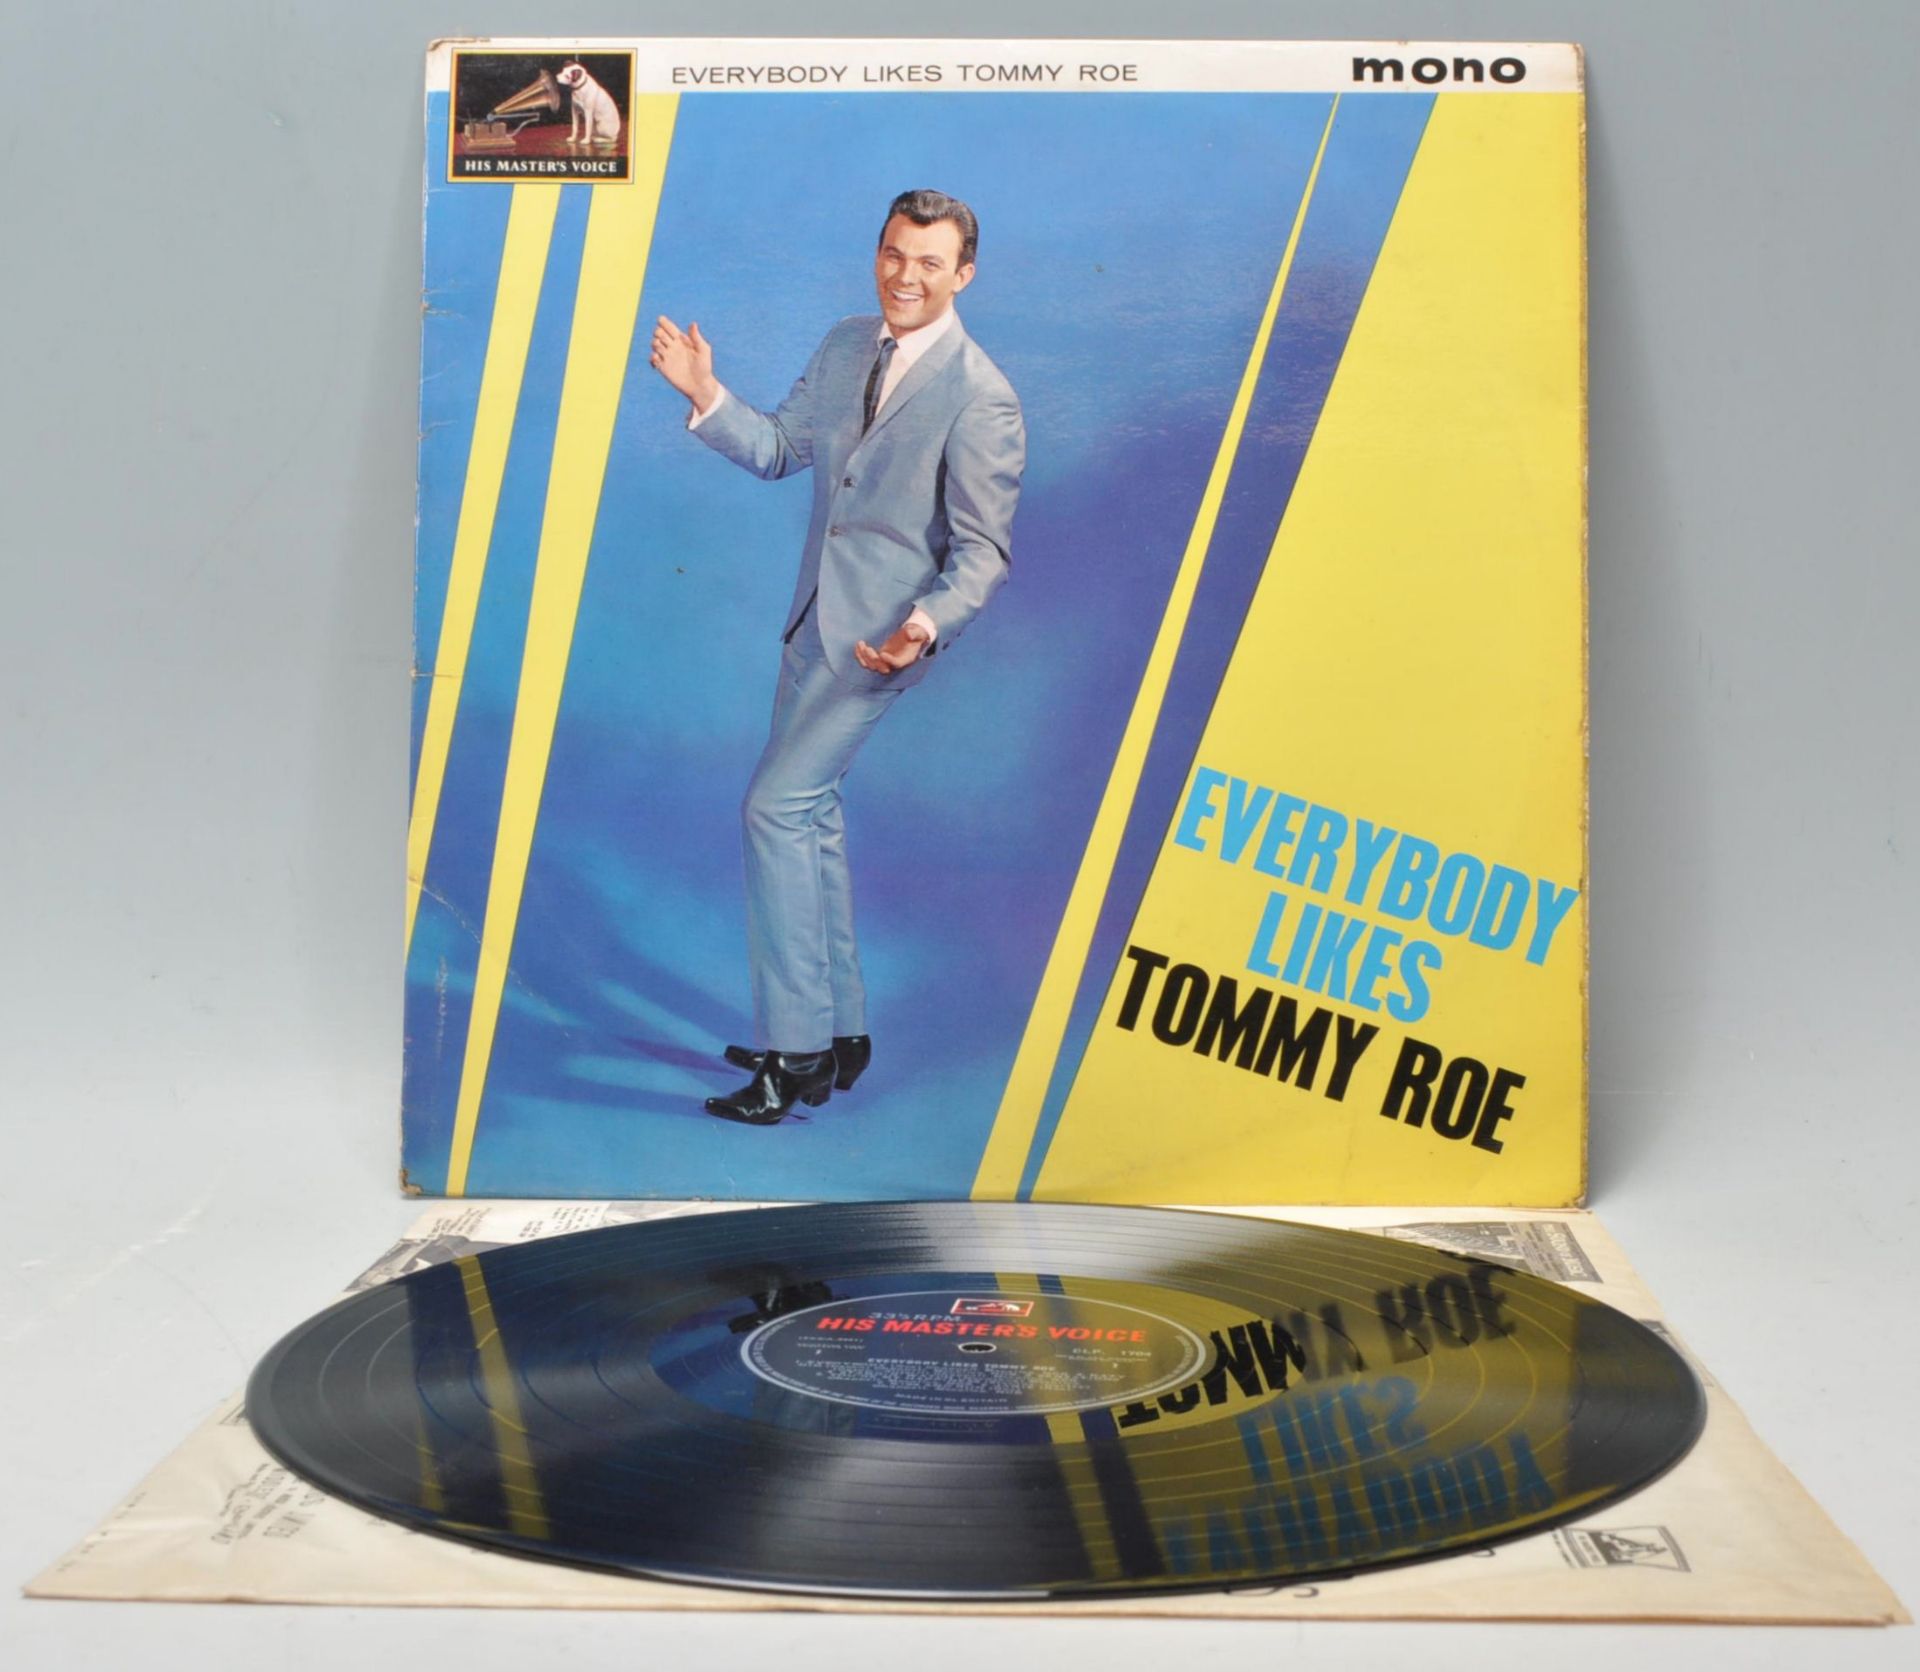 A vinyl long play LP record album by Tommy Roe – Everybody Likes – Original His Master's Voice 1st